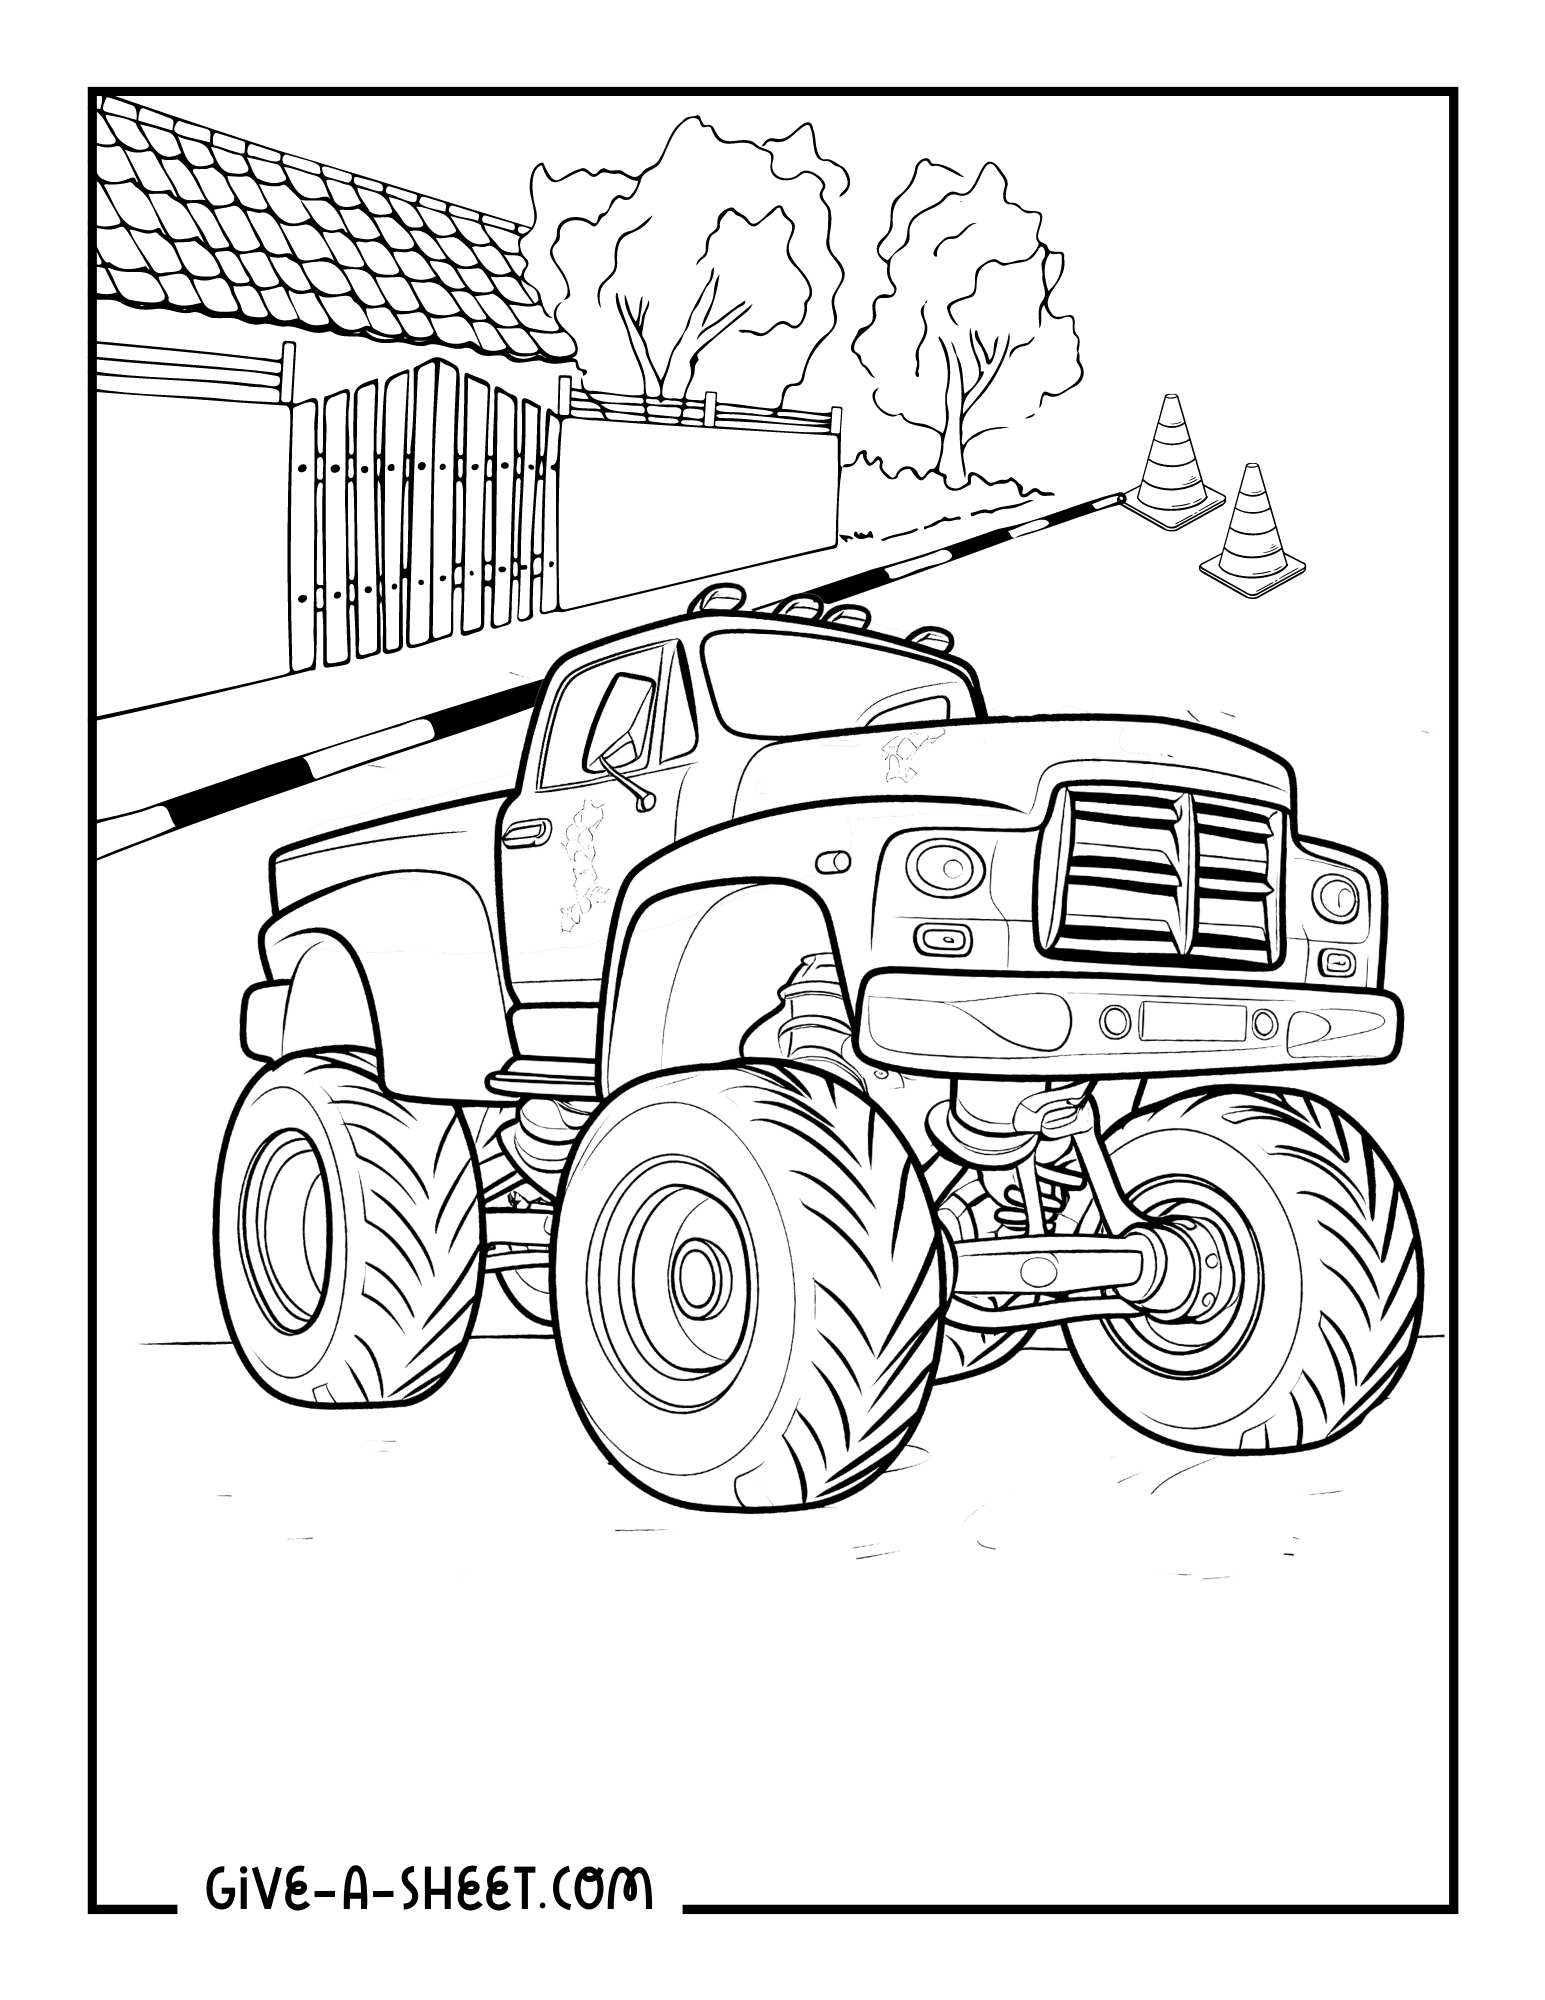 Monster truck powerful vehicles to color in for kids.